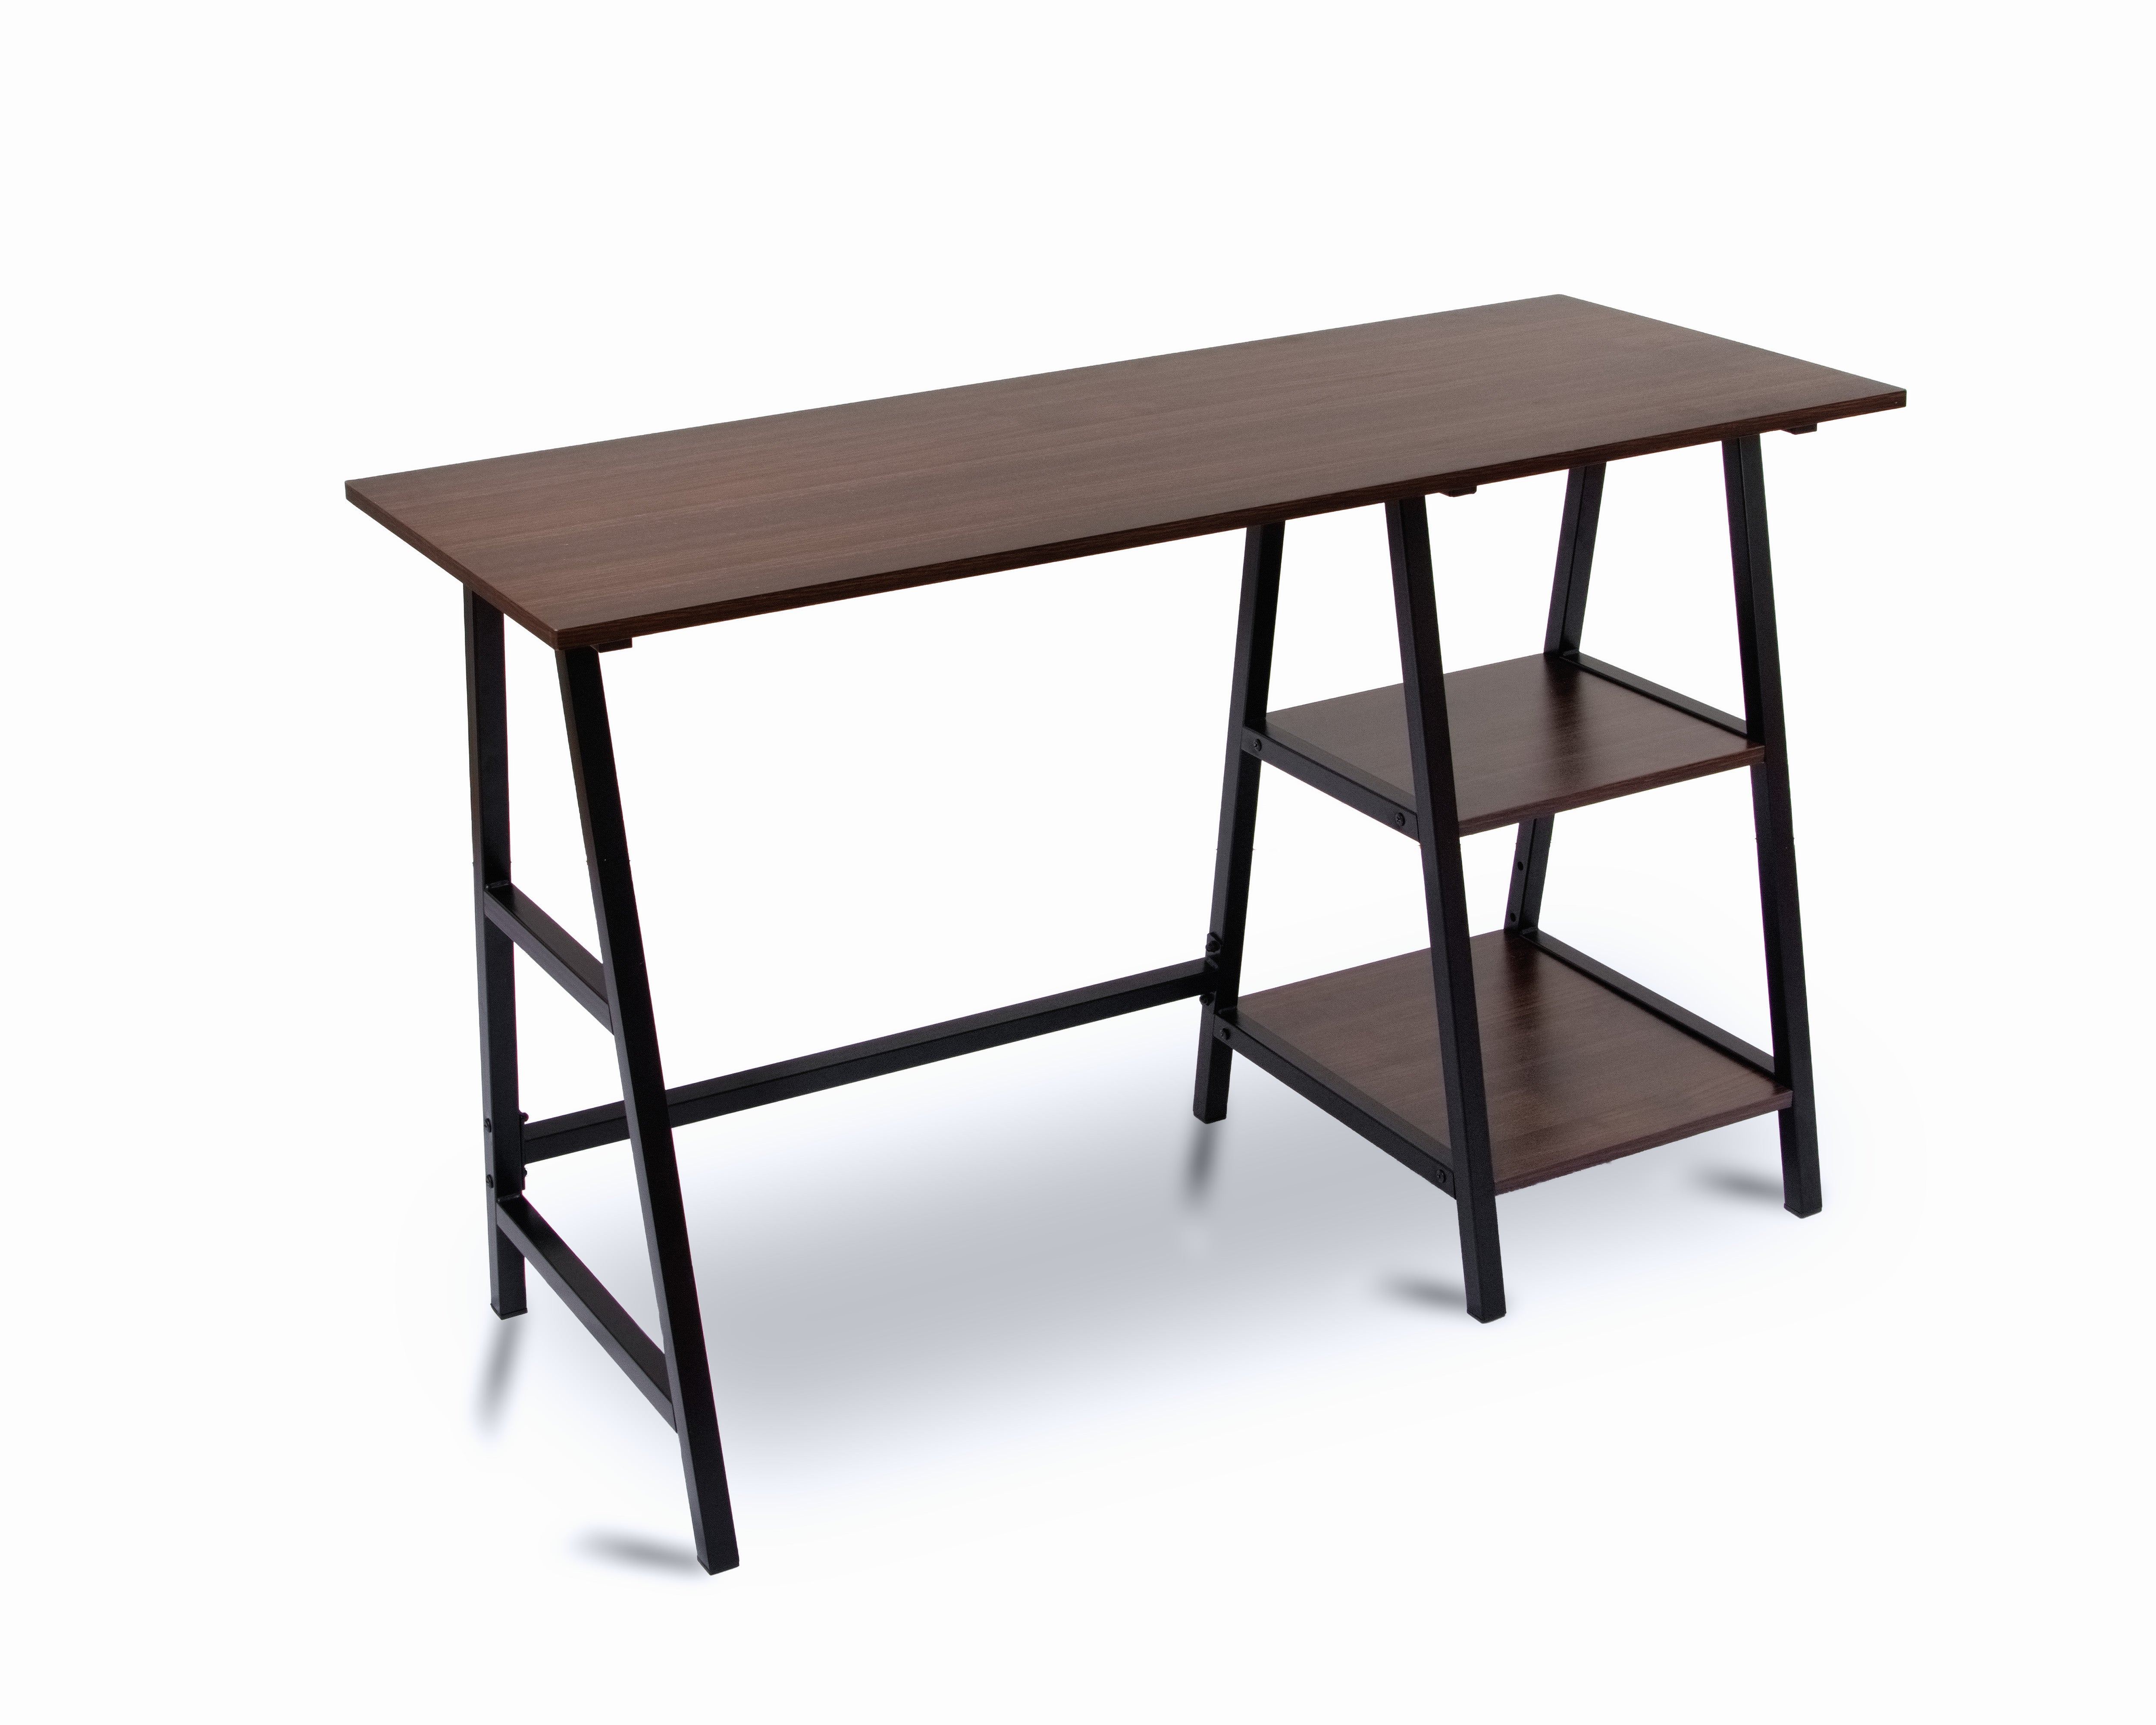 ZfLogic OFFICE SPACE Home Office Table Computer Desk with 2 Shelves (Dark Brown)